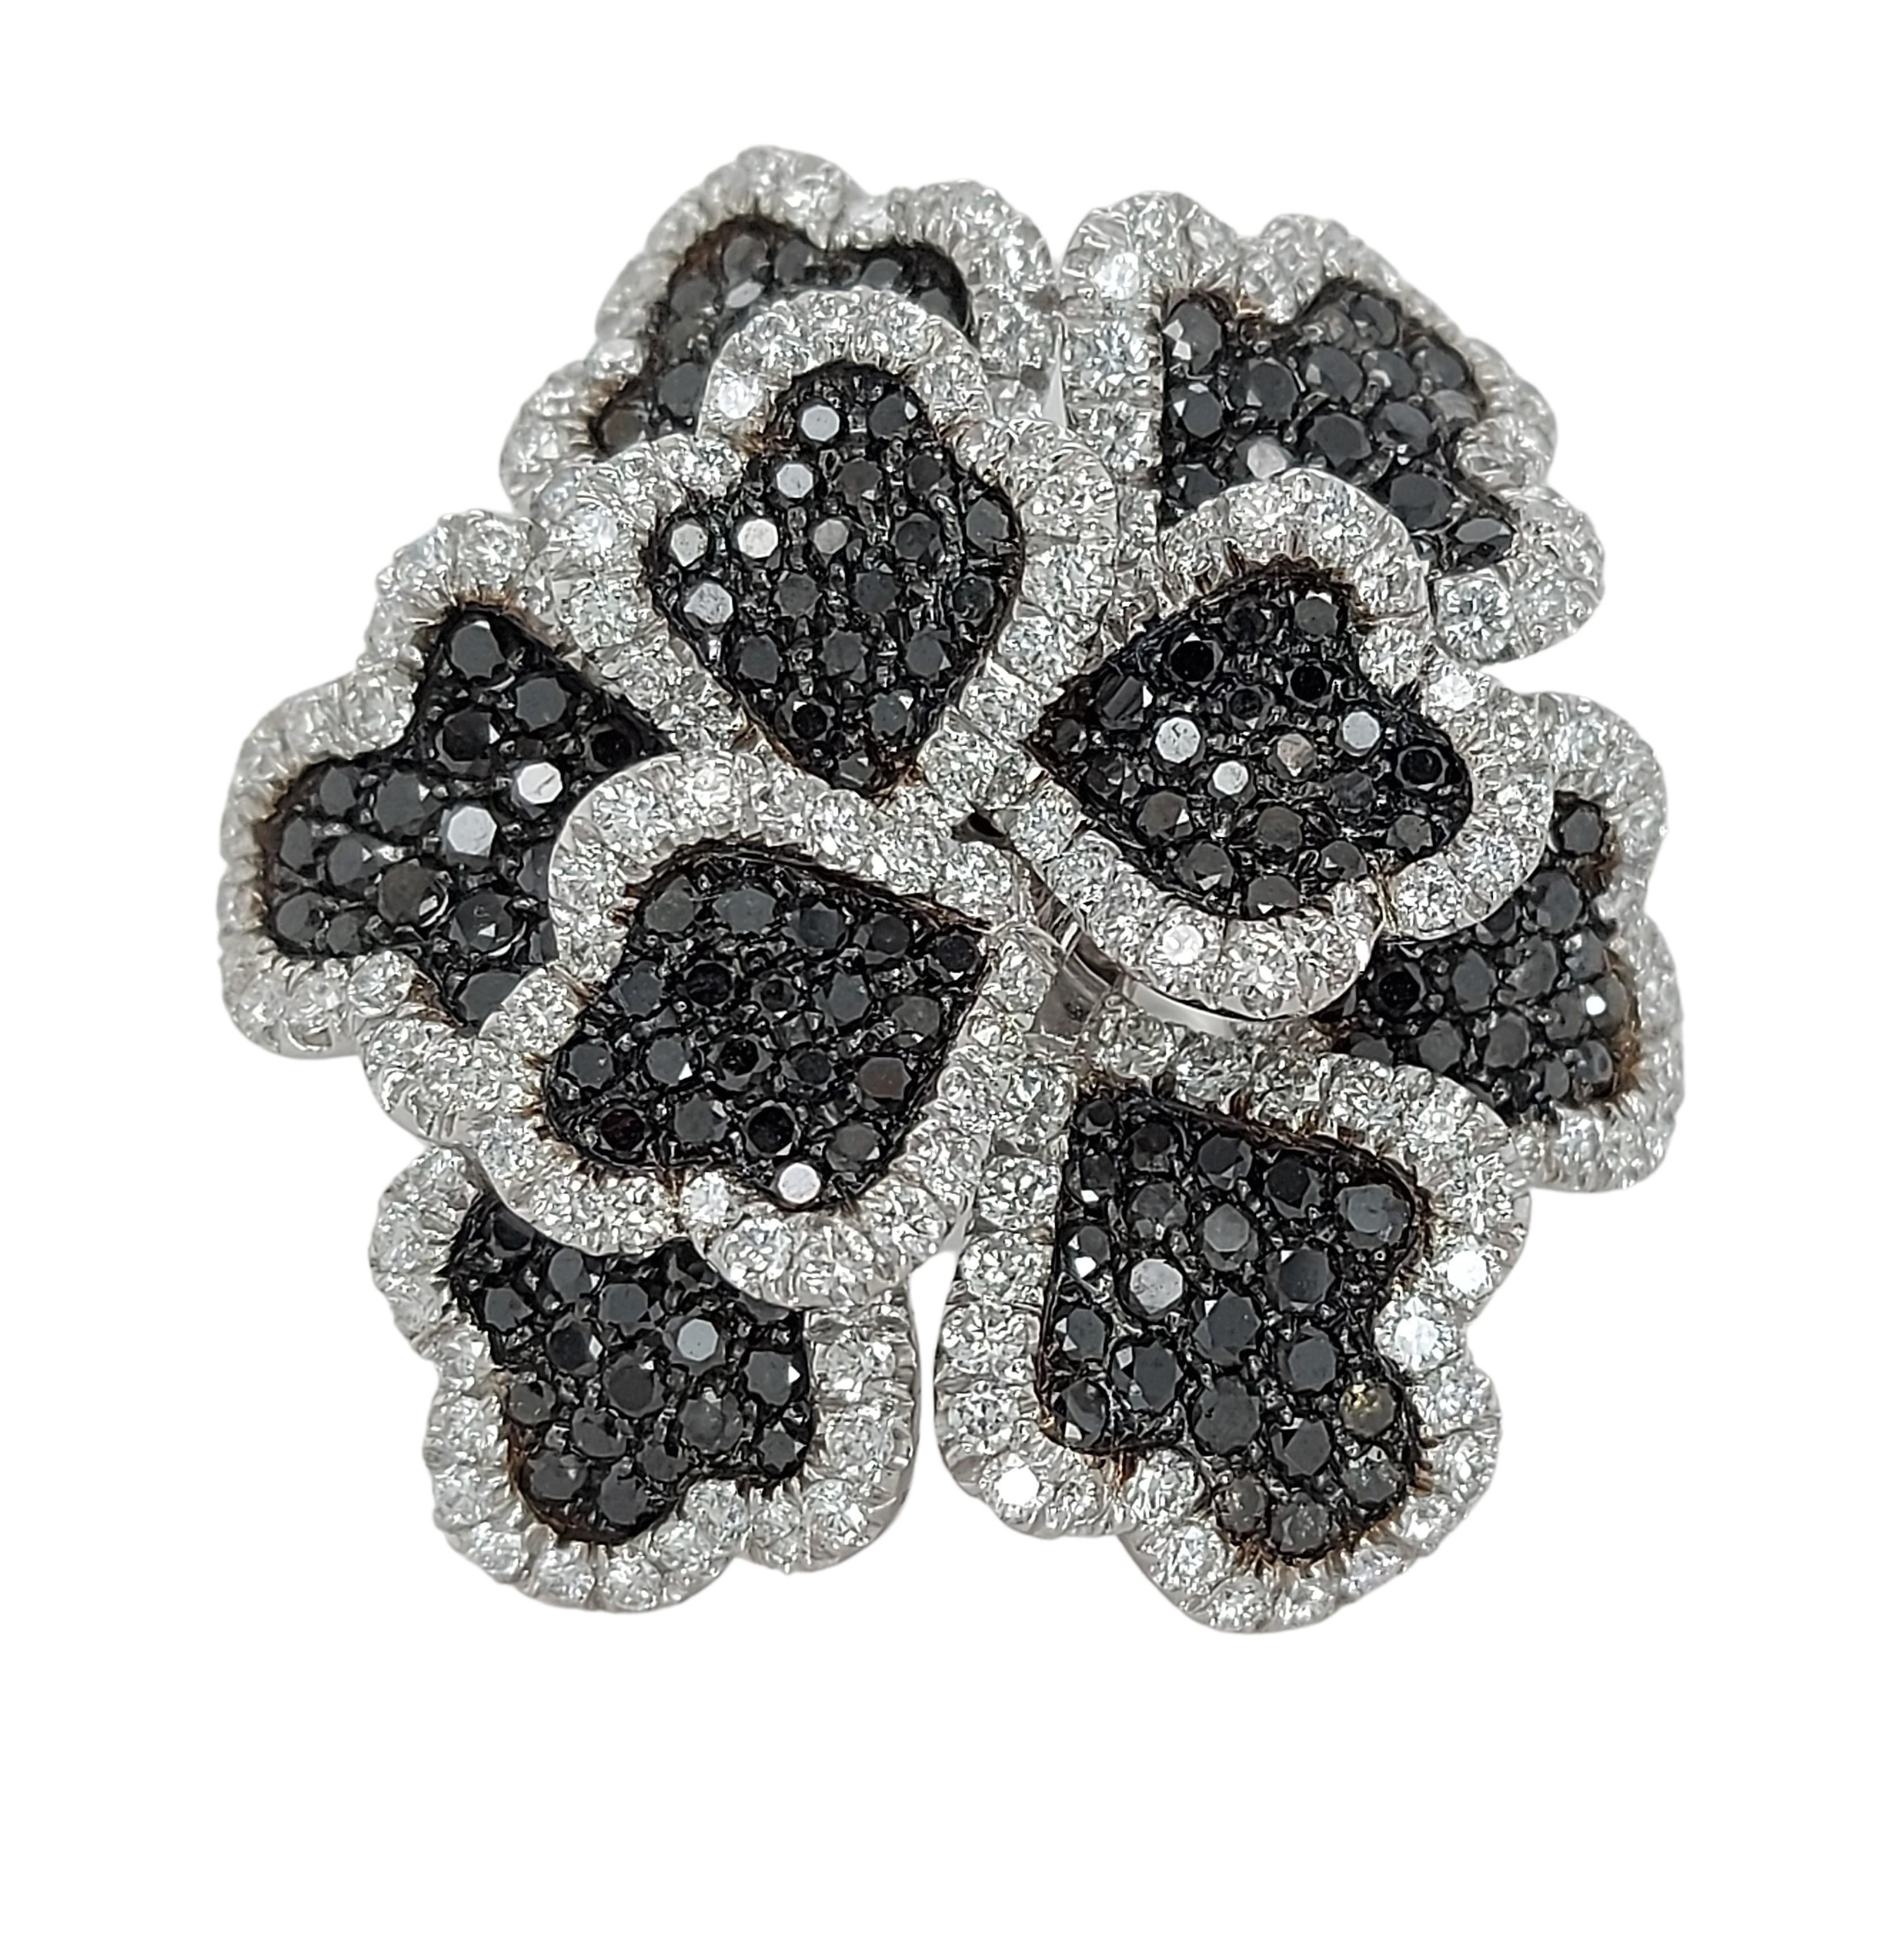 Magnificent 18kt White Gold Flower Ring With 3.13ct Brilliant Cut Diamonds, 3.35ct Black Diamonds

Brilliant cut diamonds: together 3.13ct

Black diamonds: together 3.35ct

Material: 18kt white gold

Total weight: 20.7 gram / 0.730 oz / 13.3